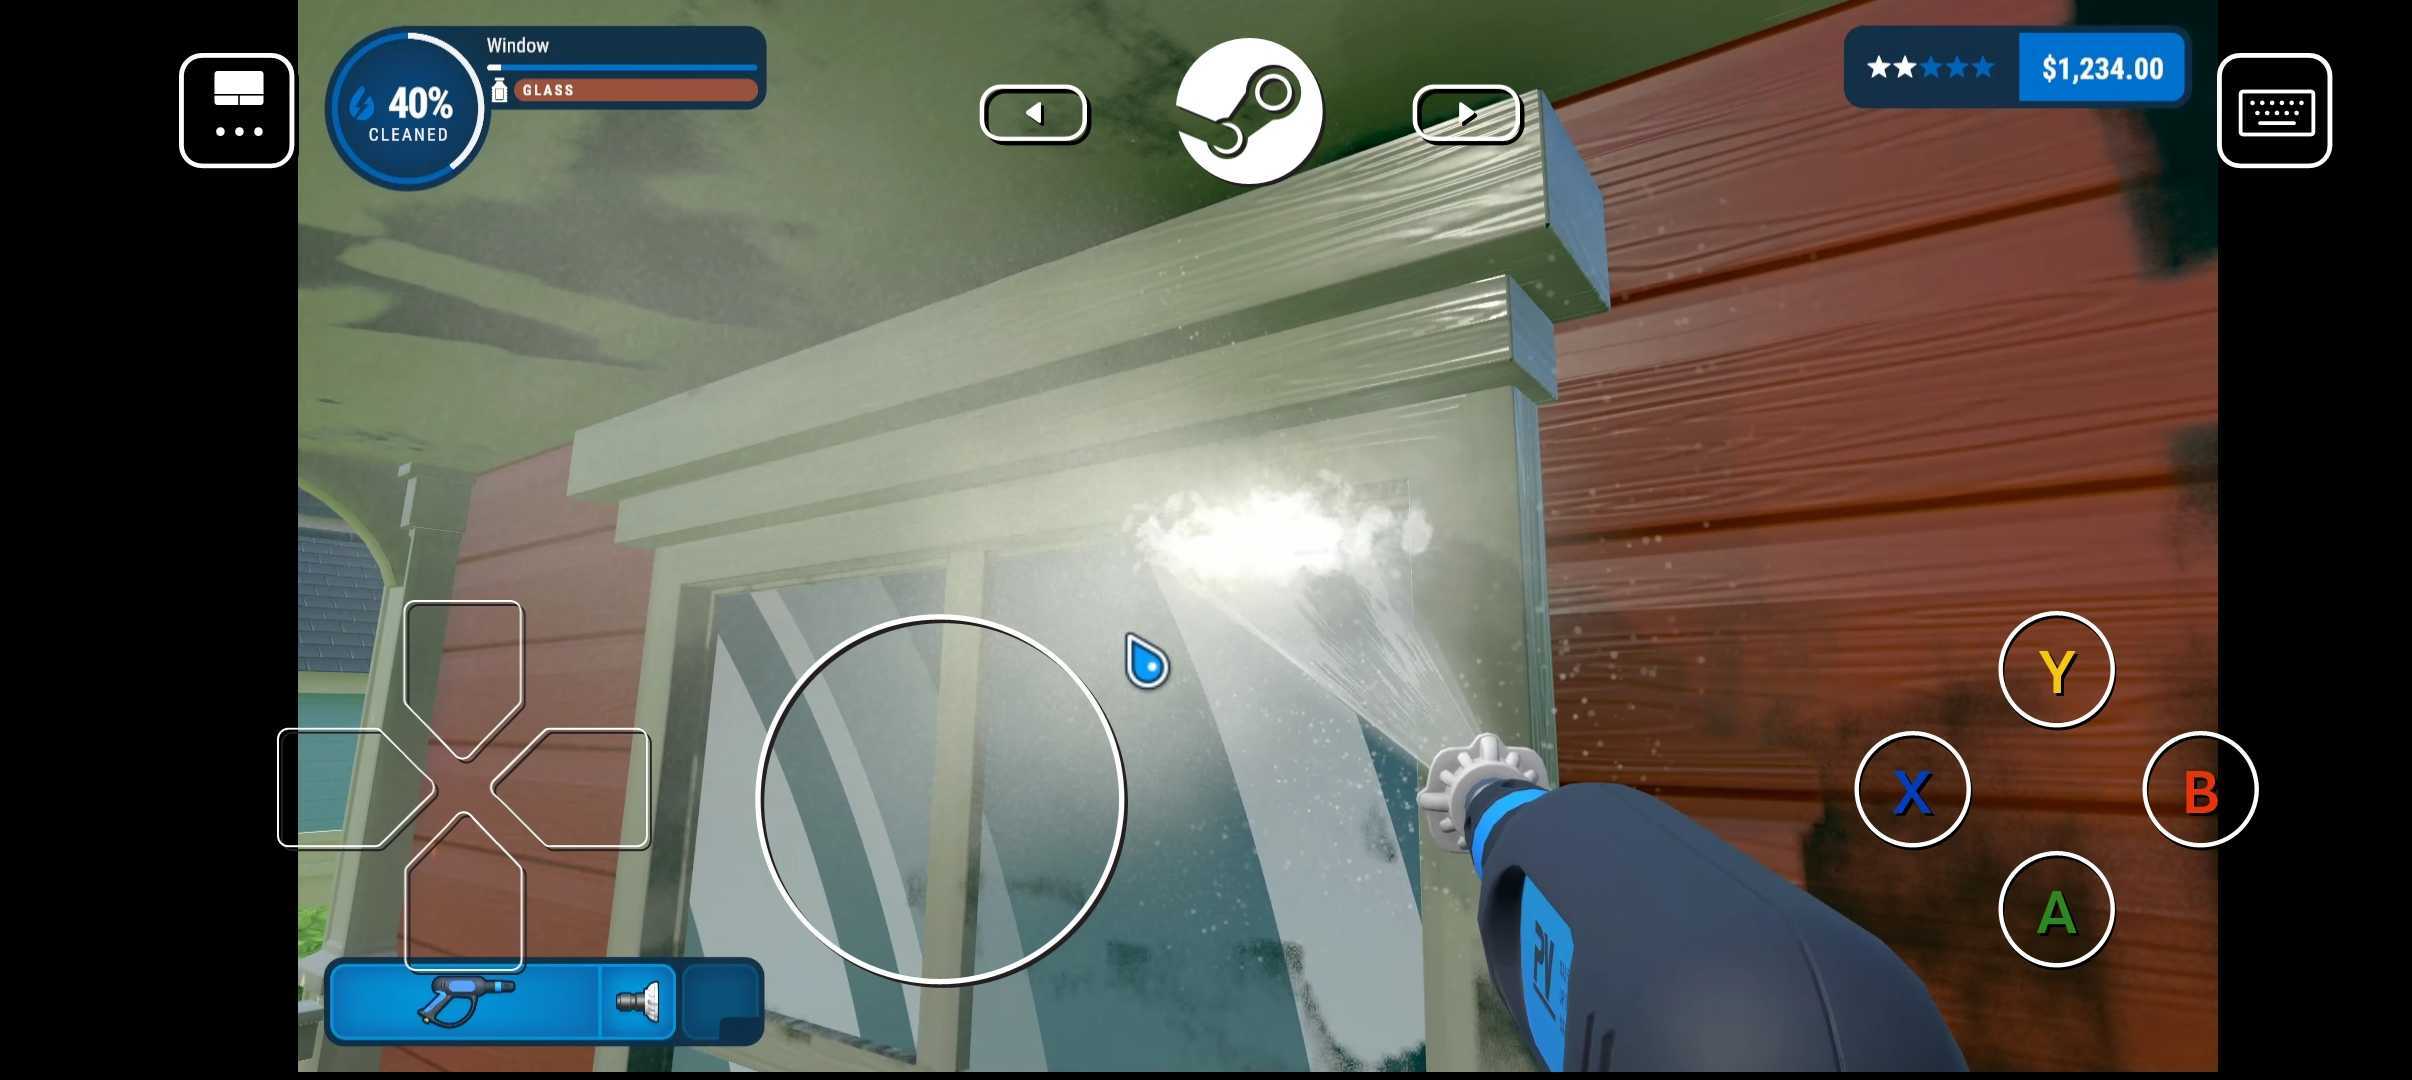 Power Wash Simulator's gameplay is simple enough to enjoy streamed to your phone while you're lounging on the couch